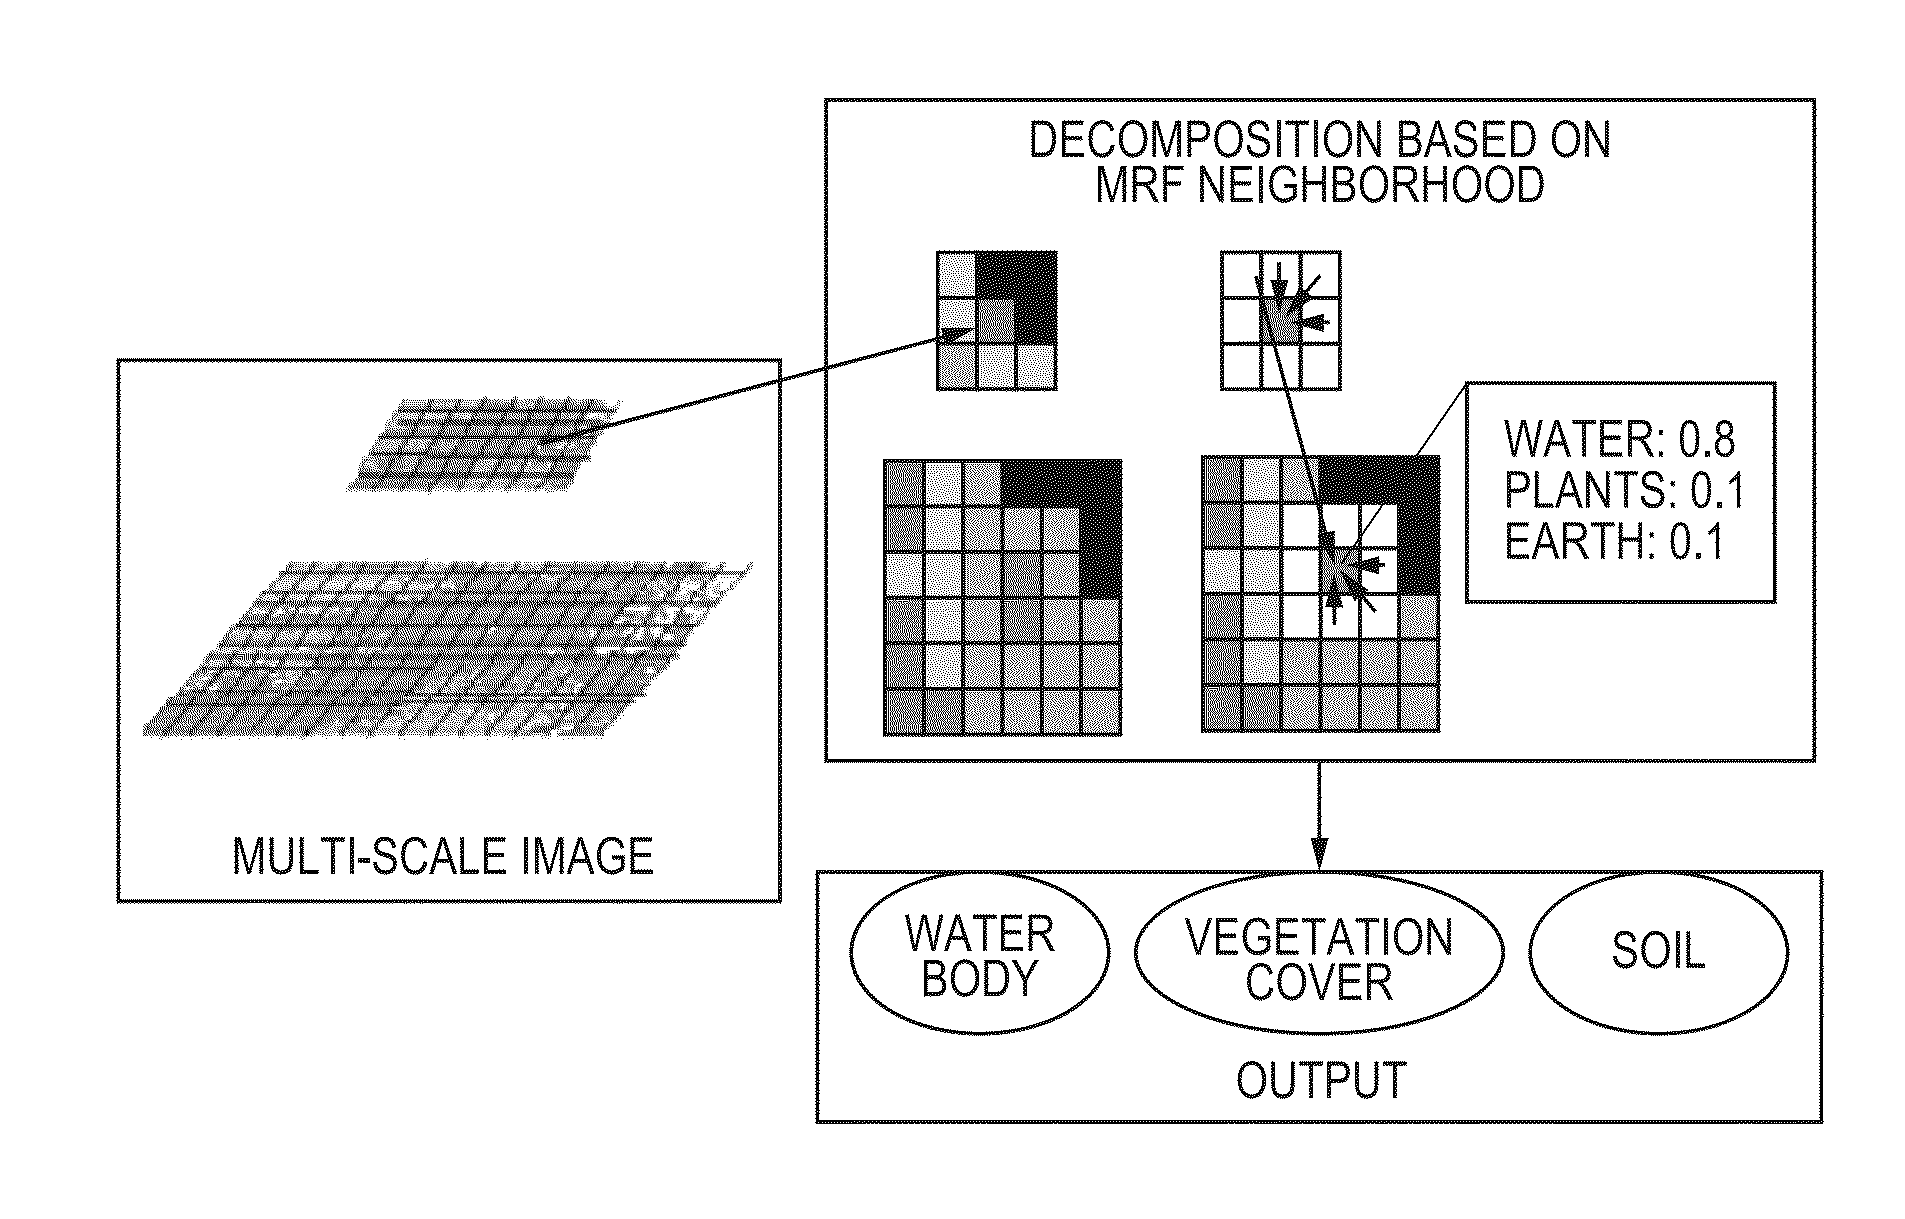 Decomposition apparatus and method for refining composition of mixed pixels in remote sensing images